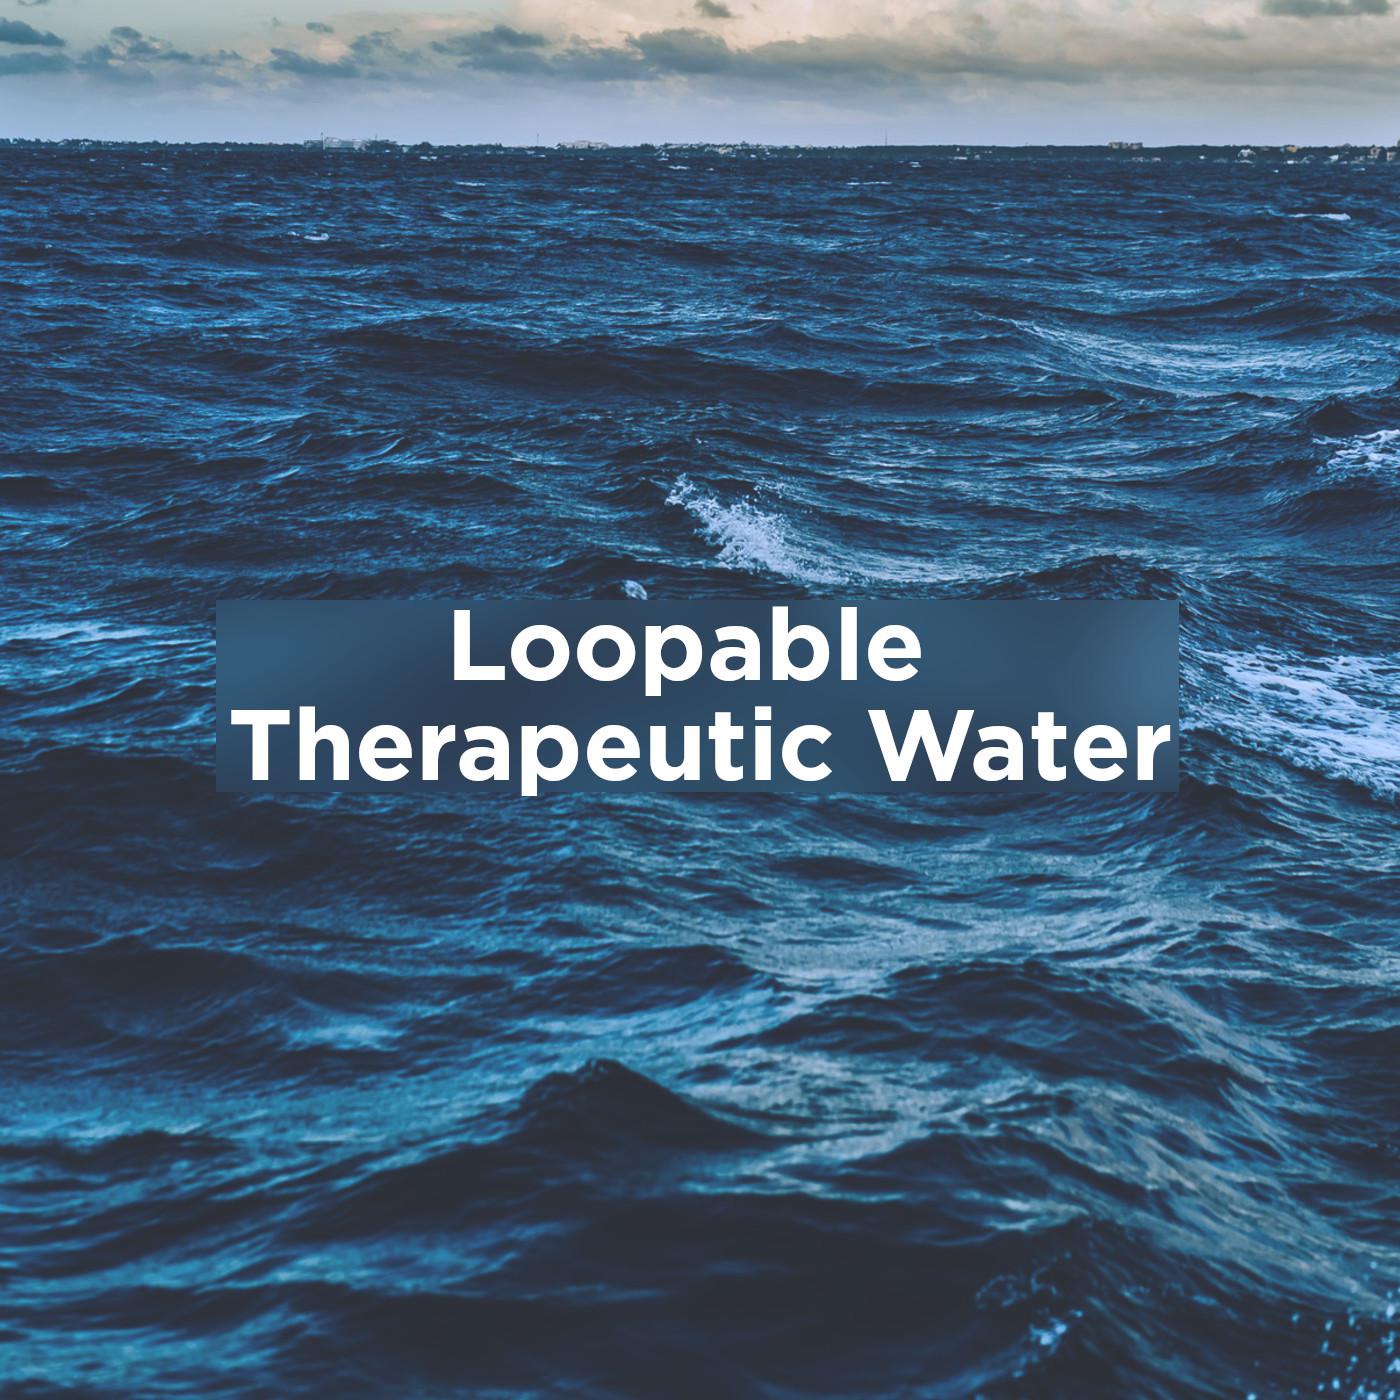 Loopable Therapeutic Water